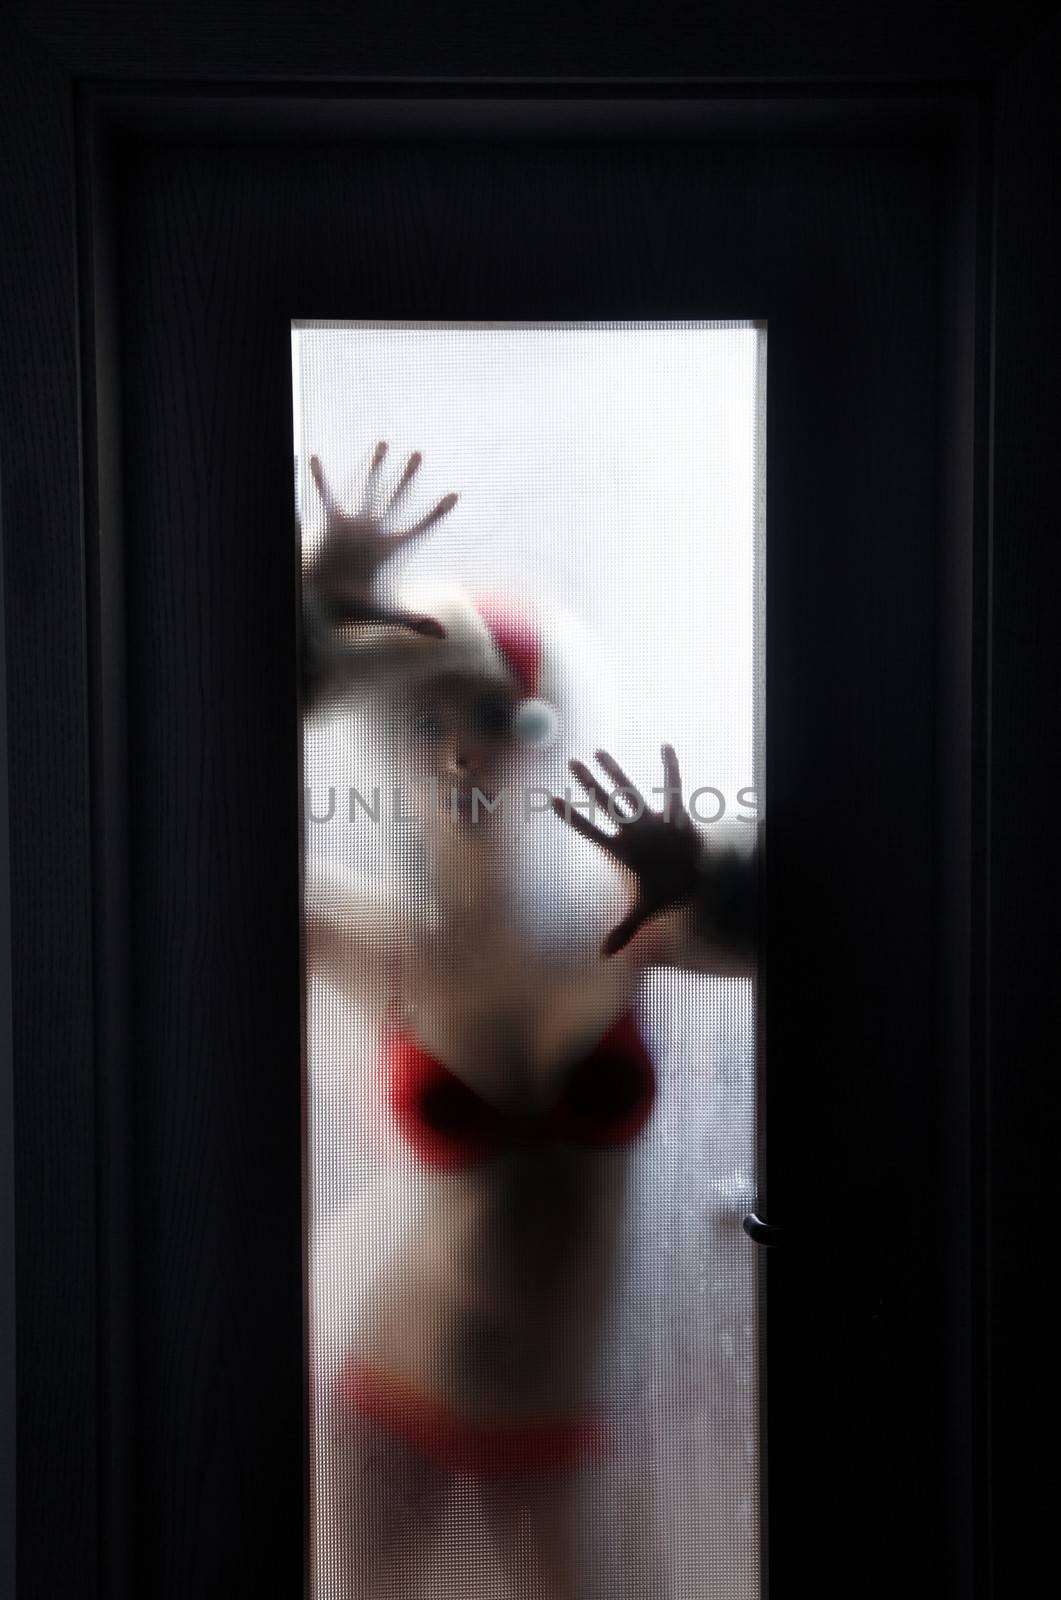 Silhouette of the woman in the red lingerie and Santa Claus hat behind the solid glass door in dark interior. Natural colors and shadows